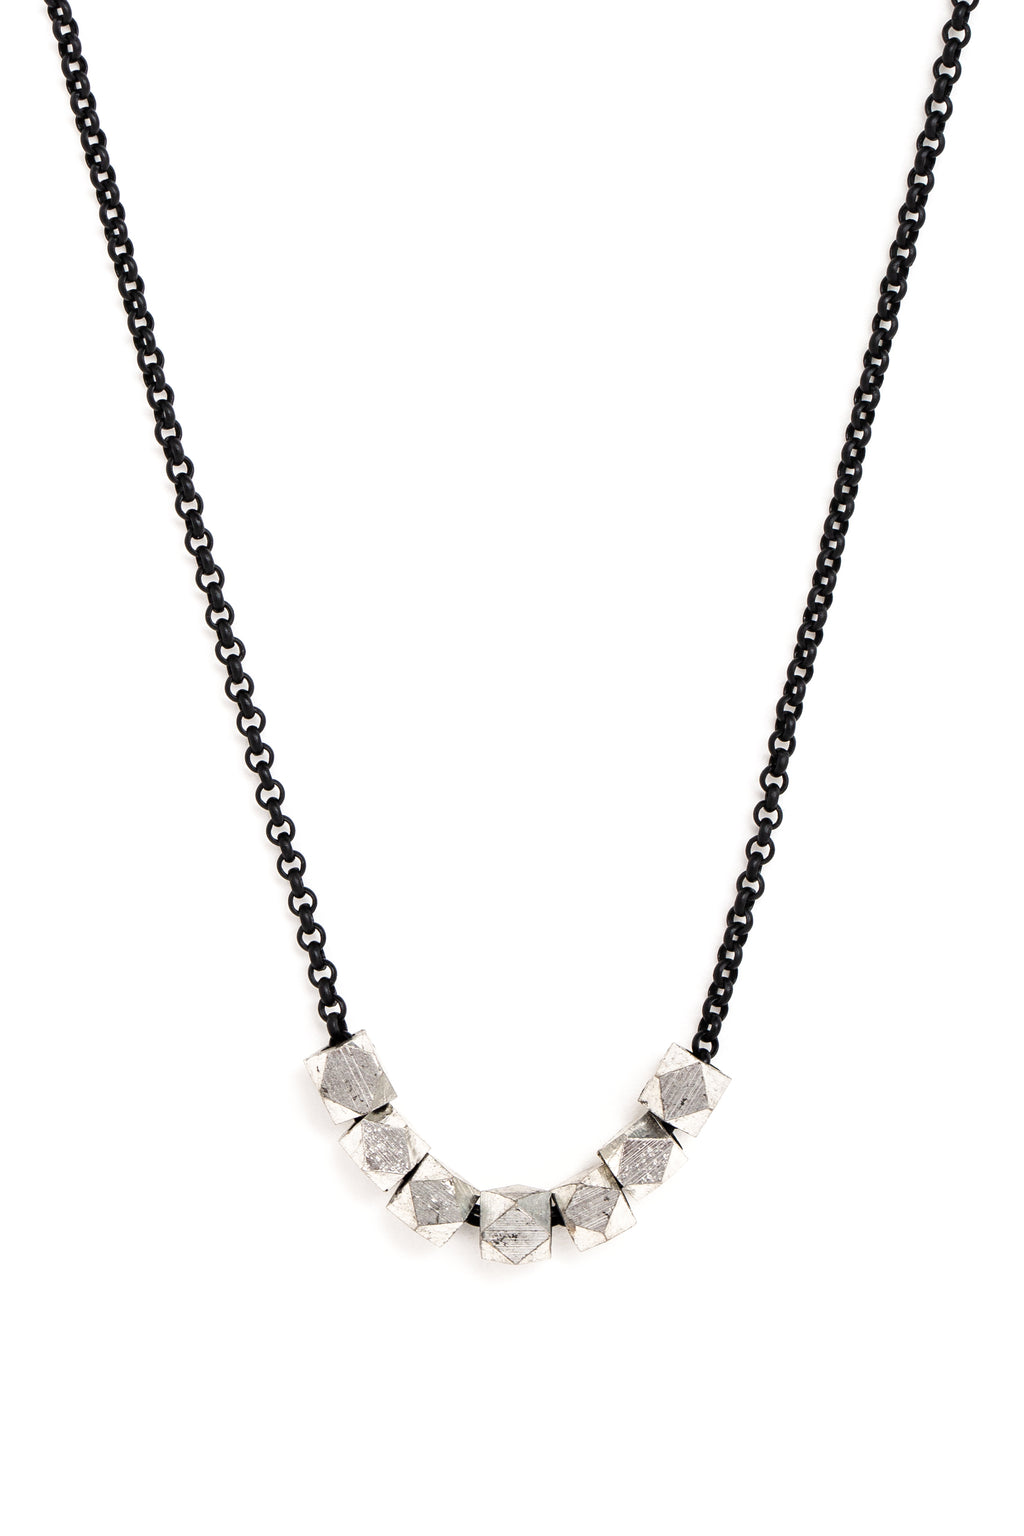 Small Silver Geometric Bead Necklace on Black Chain